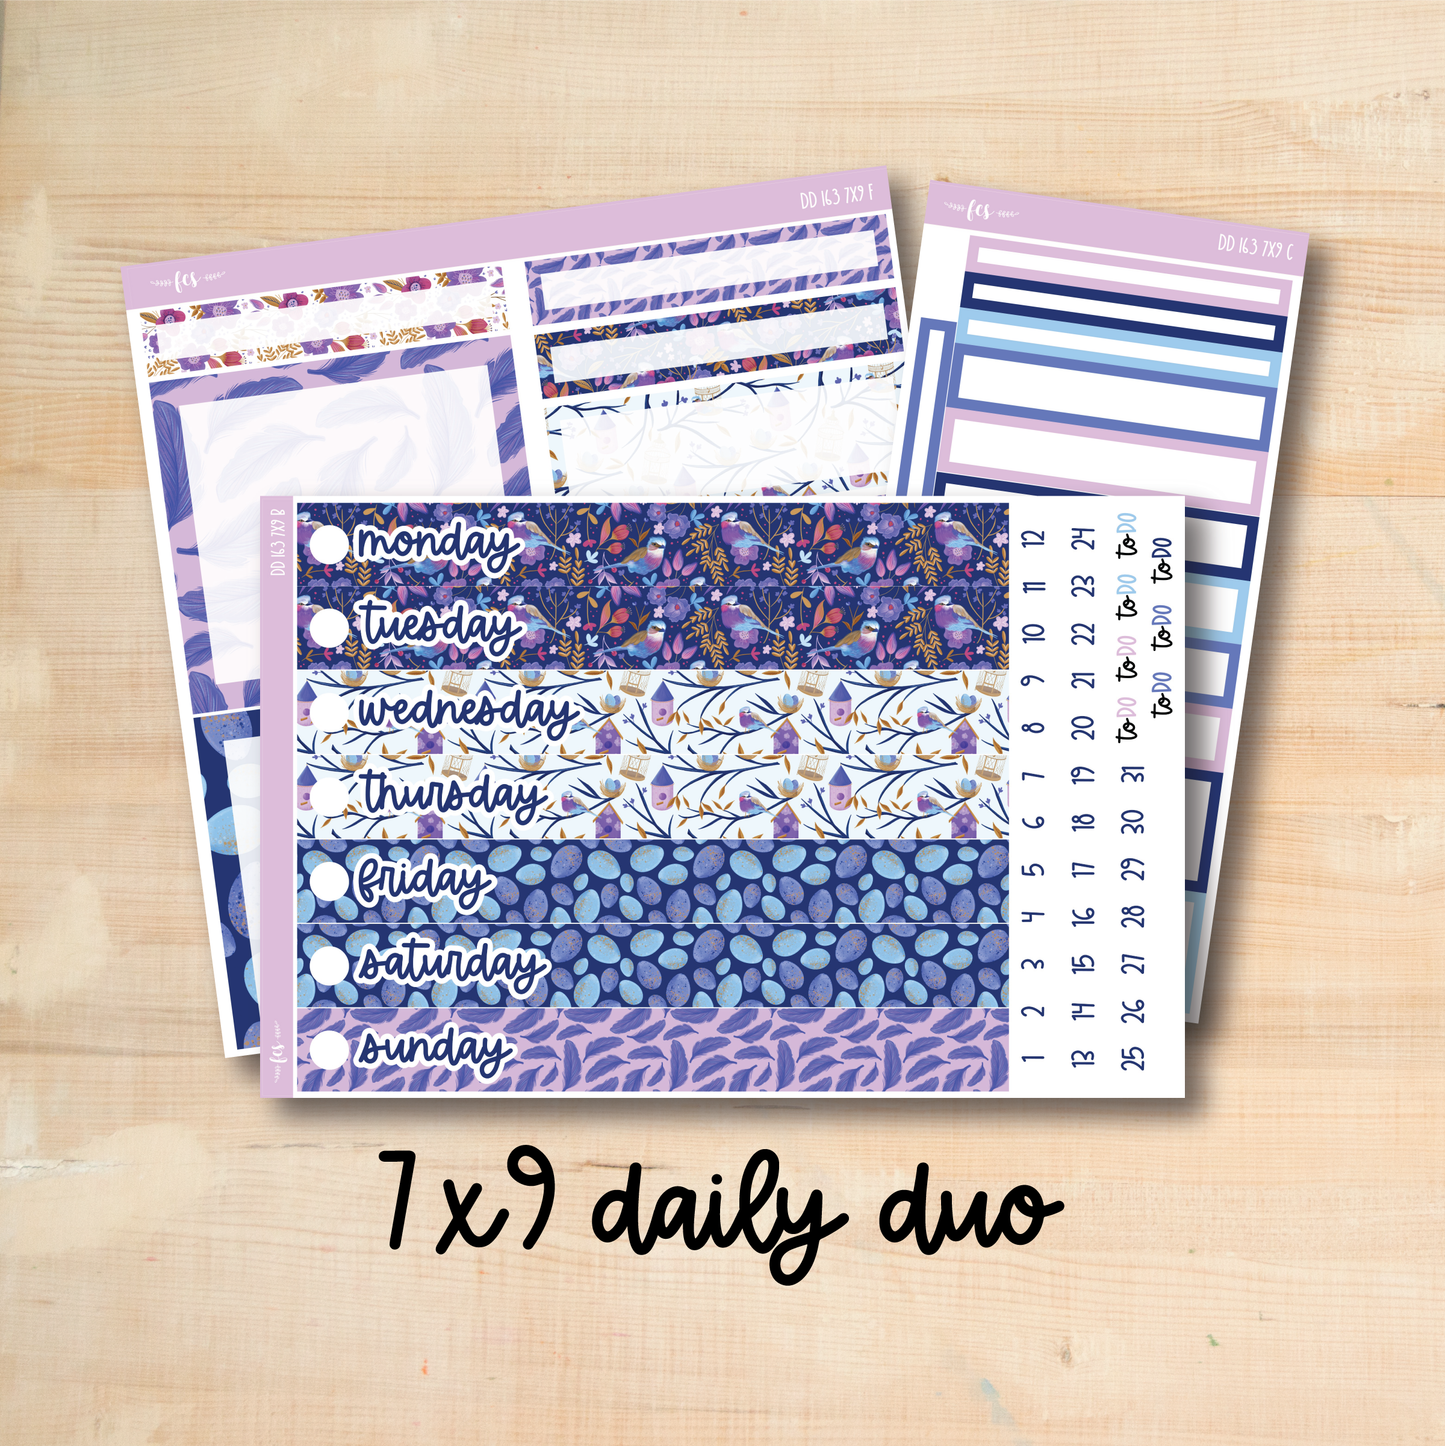 7x9 Daily Duo 163 || FANCY FEATHERS 7x9 Daily Duo Kit